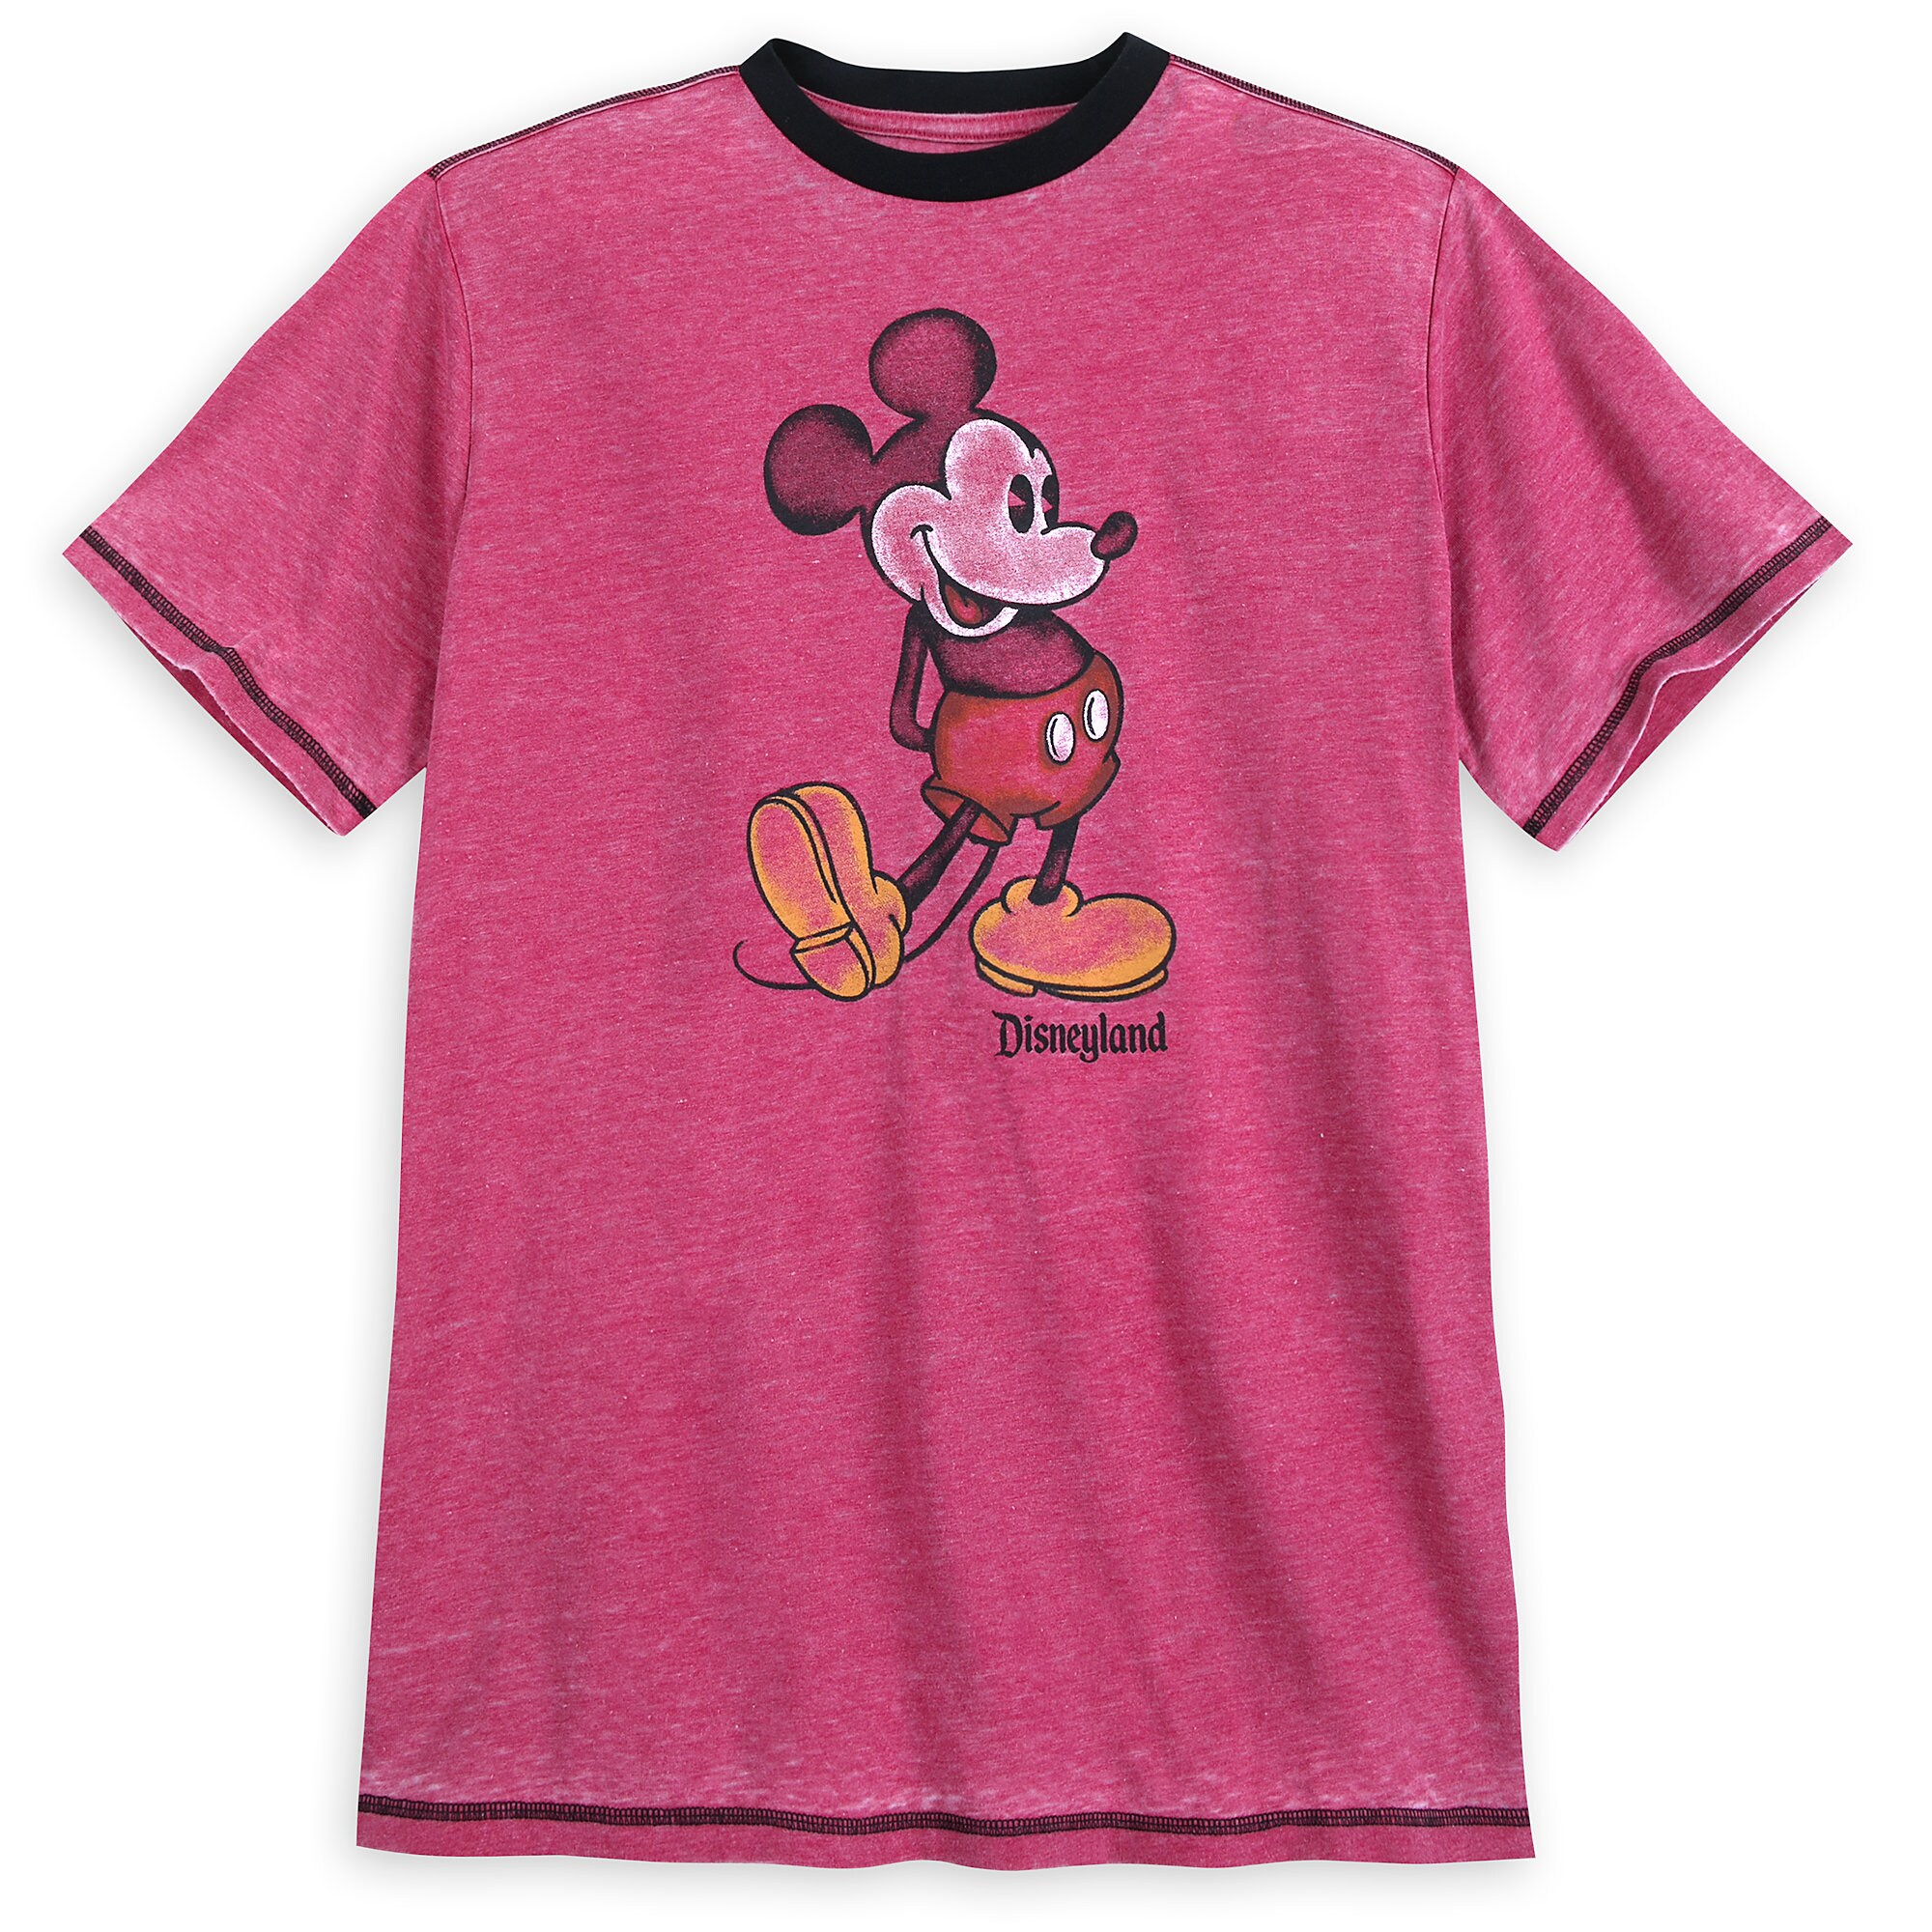 Mickey Mouse Classic Ringer T-Shirt for Men - Disneyland - Red